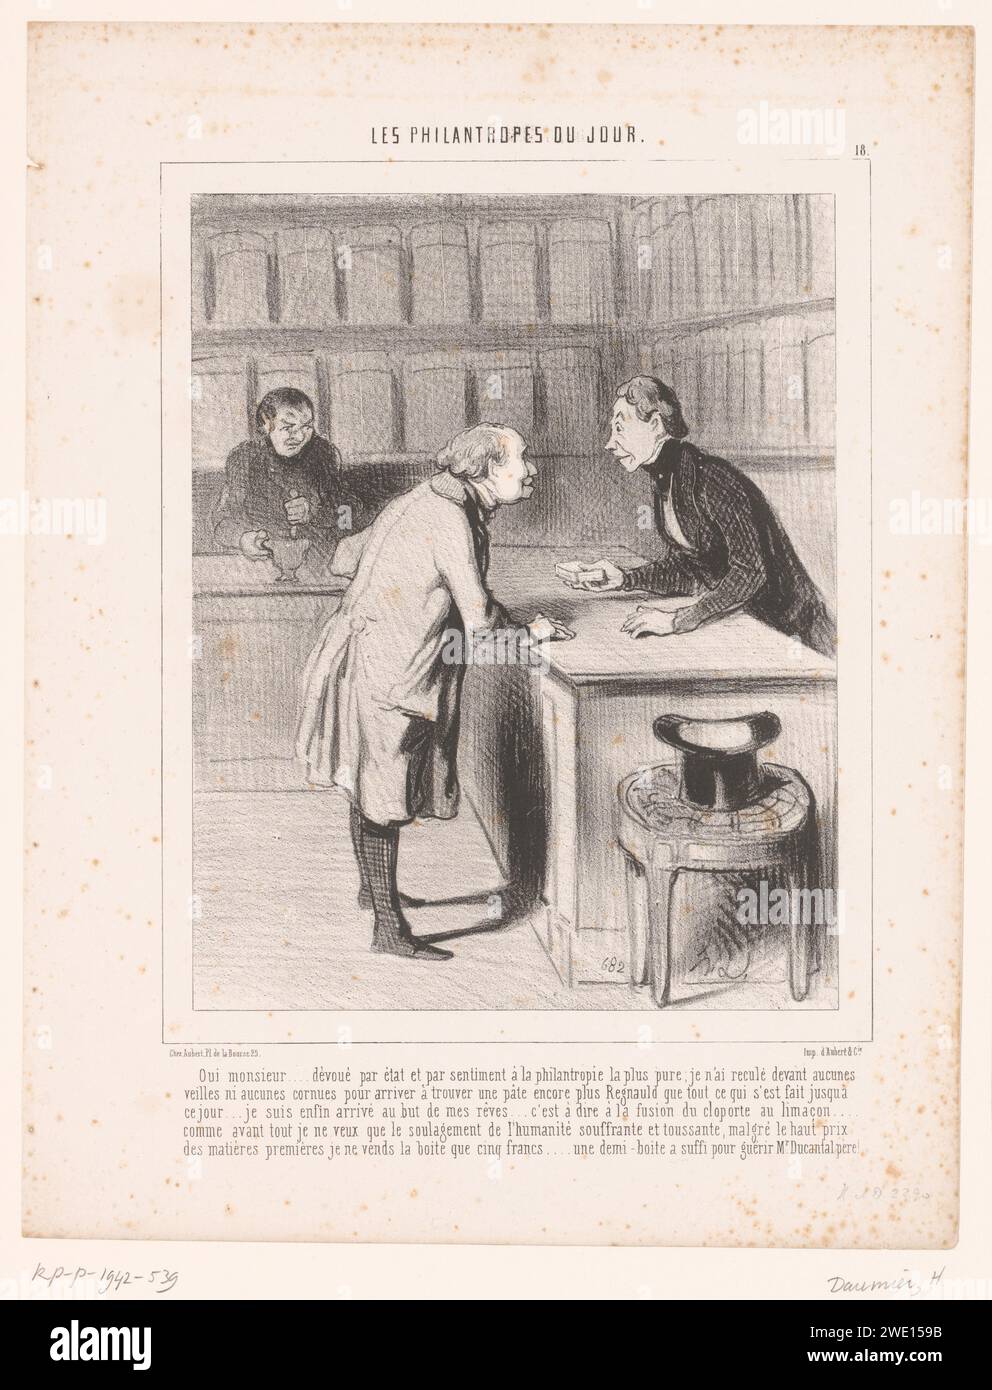 Pharmacist sells an ointment, Honoré Daumier, 1844  The pharmacist tells his customer that he has put a lot of time and effort into developing a medicinal ointment. He is driven by his philanthropic motives and is therefore willing to sell the ointment with a discount. Paris paper  caricatures (human types). ointments. pharmacist, druggist, apothecary; pharmacy, drugstore, dispensing chemist. philantropist. customer Stock Photo